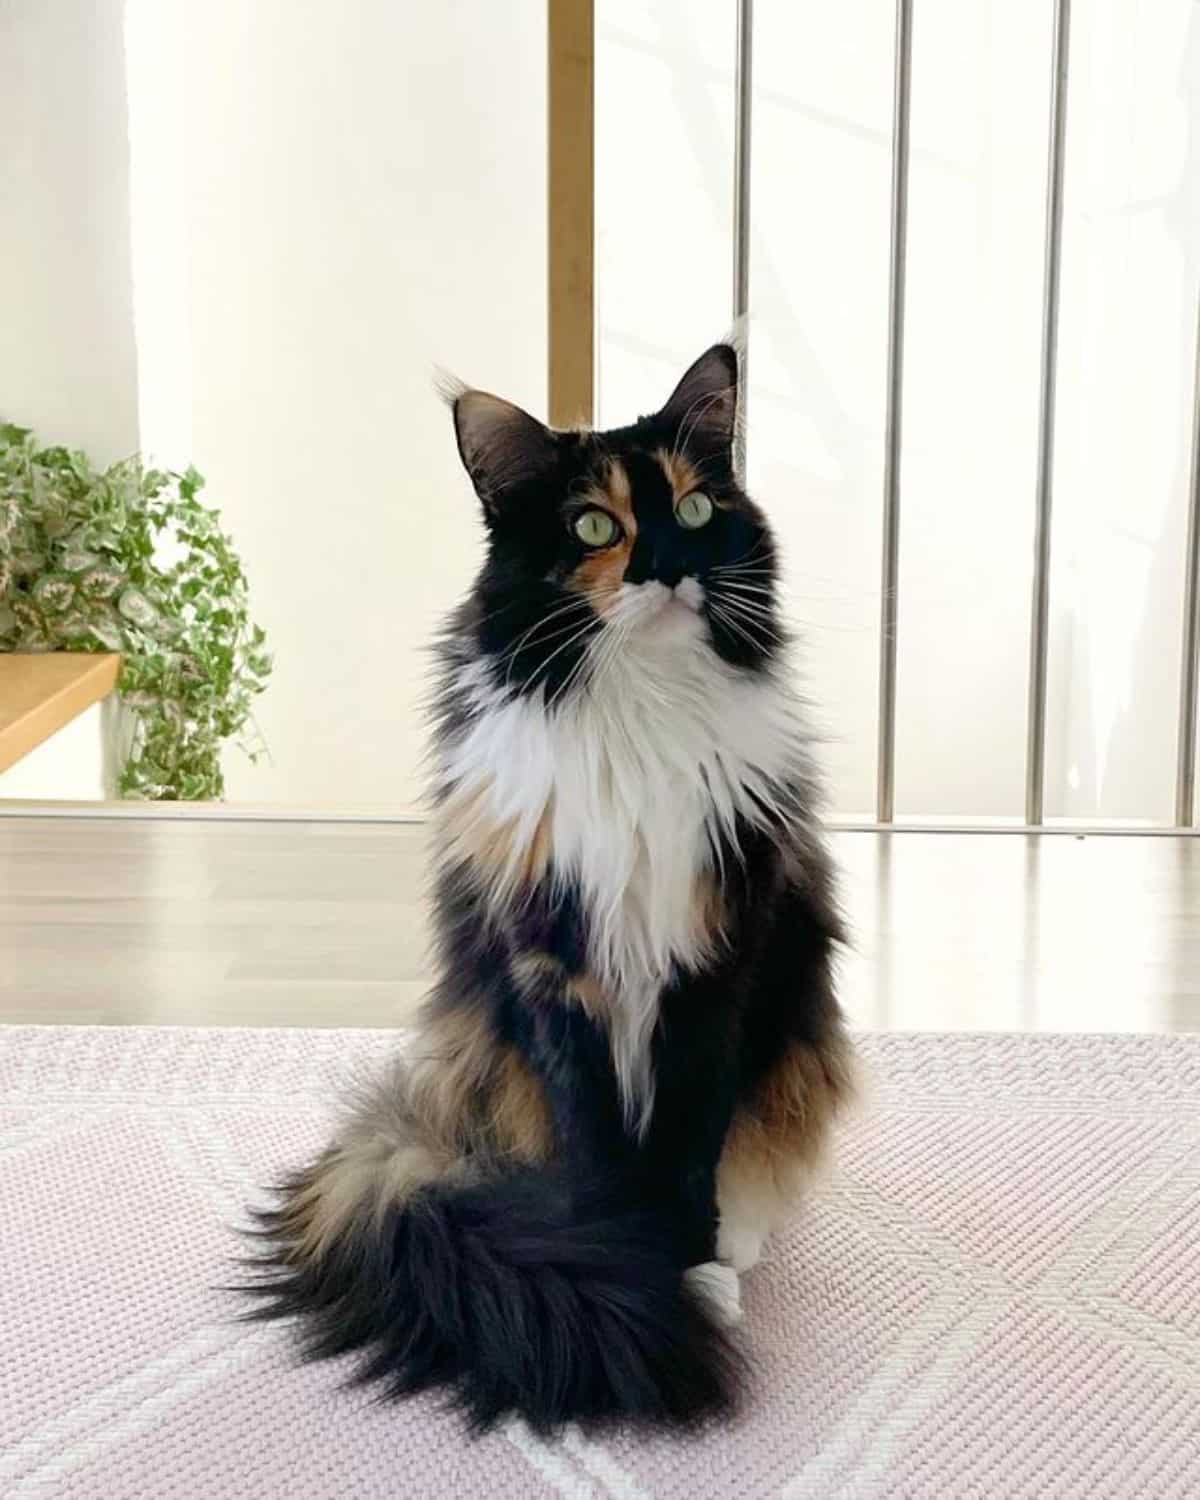 A fluffy calico maine coon sitting on a purple carpet.